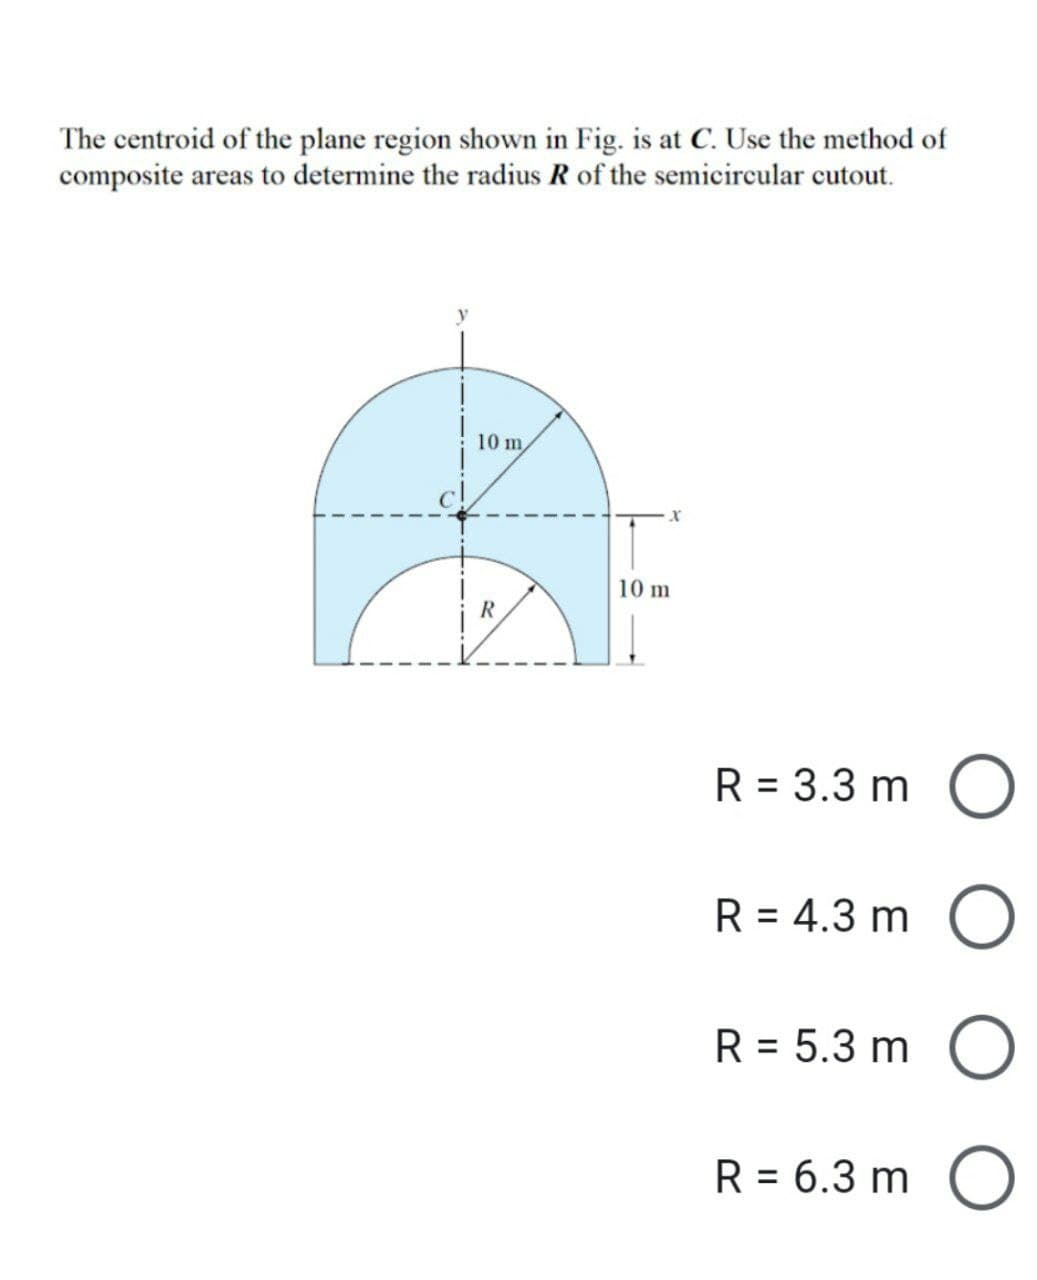 The centroid of the plane region shown in Fig. is at C. Use the method of
composite areas to determine the radius R of the semicircular cutout.
10 m,
R
10 m
R = 3.3 m
R = 4.3 m
R = 5.3 m
R = 6.3 m
O
O
O